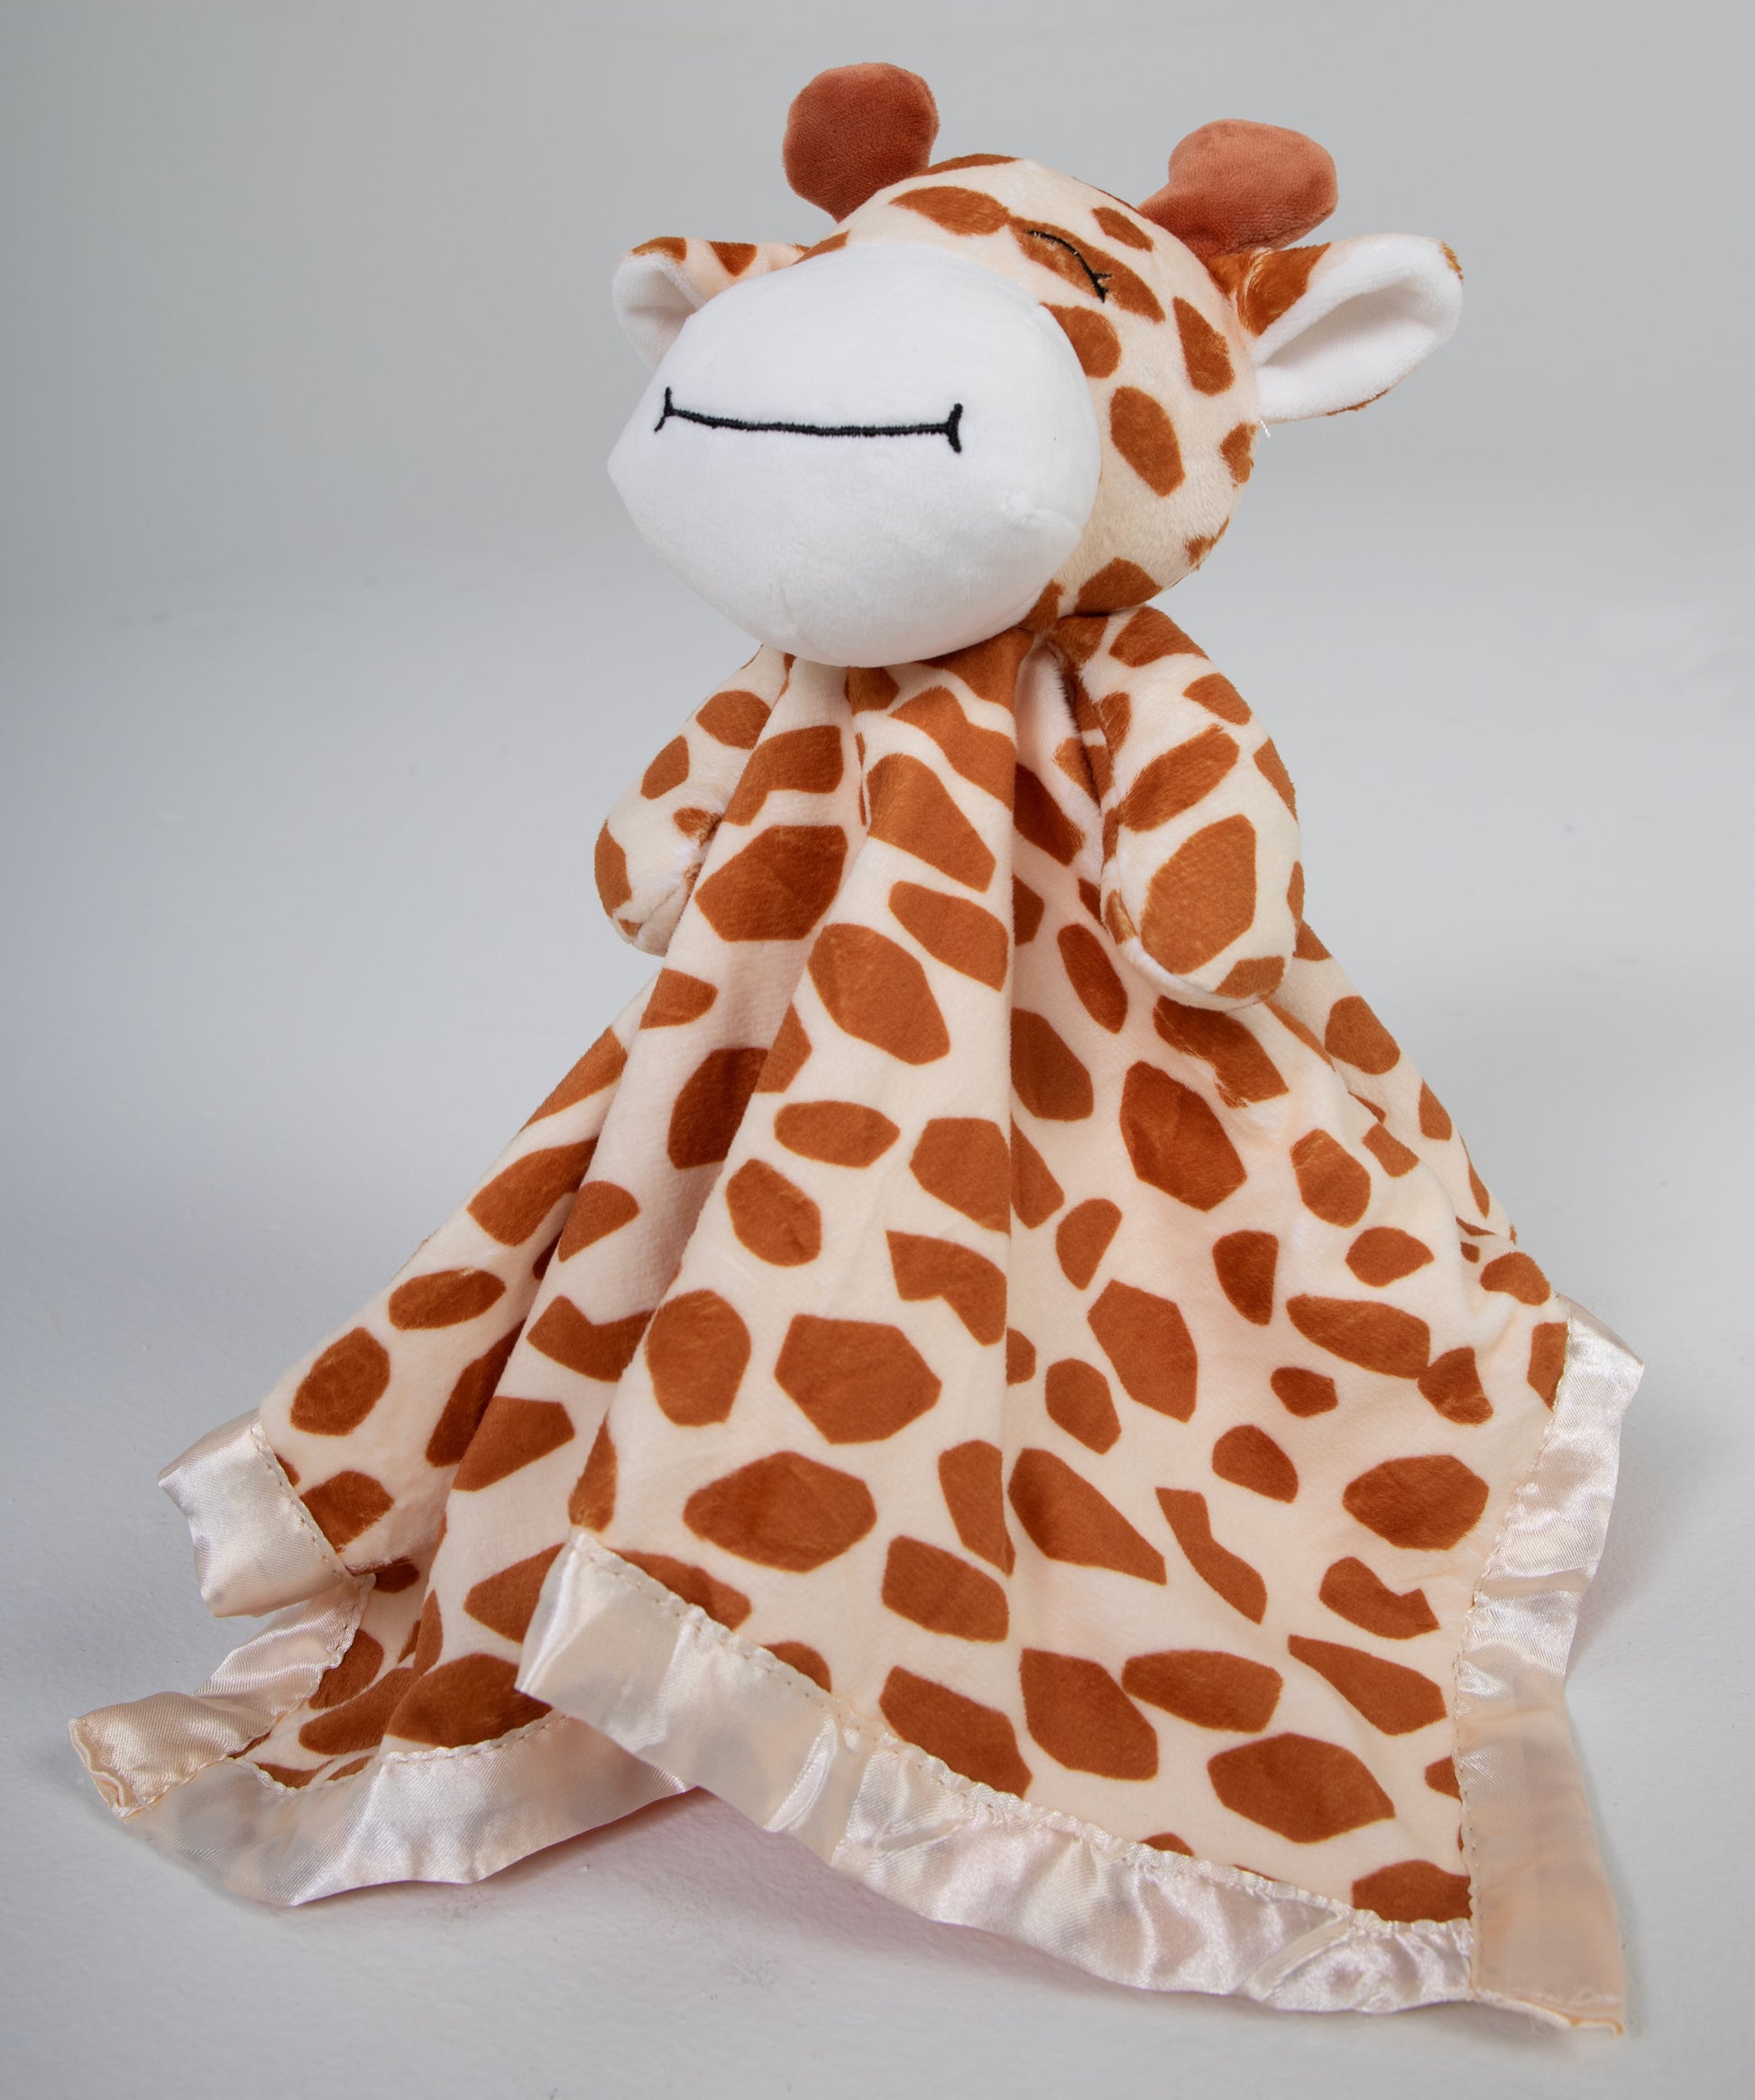 Built to withstand endless hugs, our Plush Giraffe is constructed with durable stitching and high-quality materials. It's designed to withstand the rigors of playtime, ensuring that it remains a beloved companion for years to come.